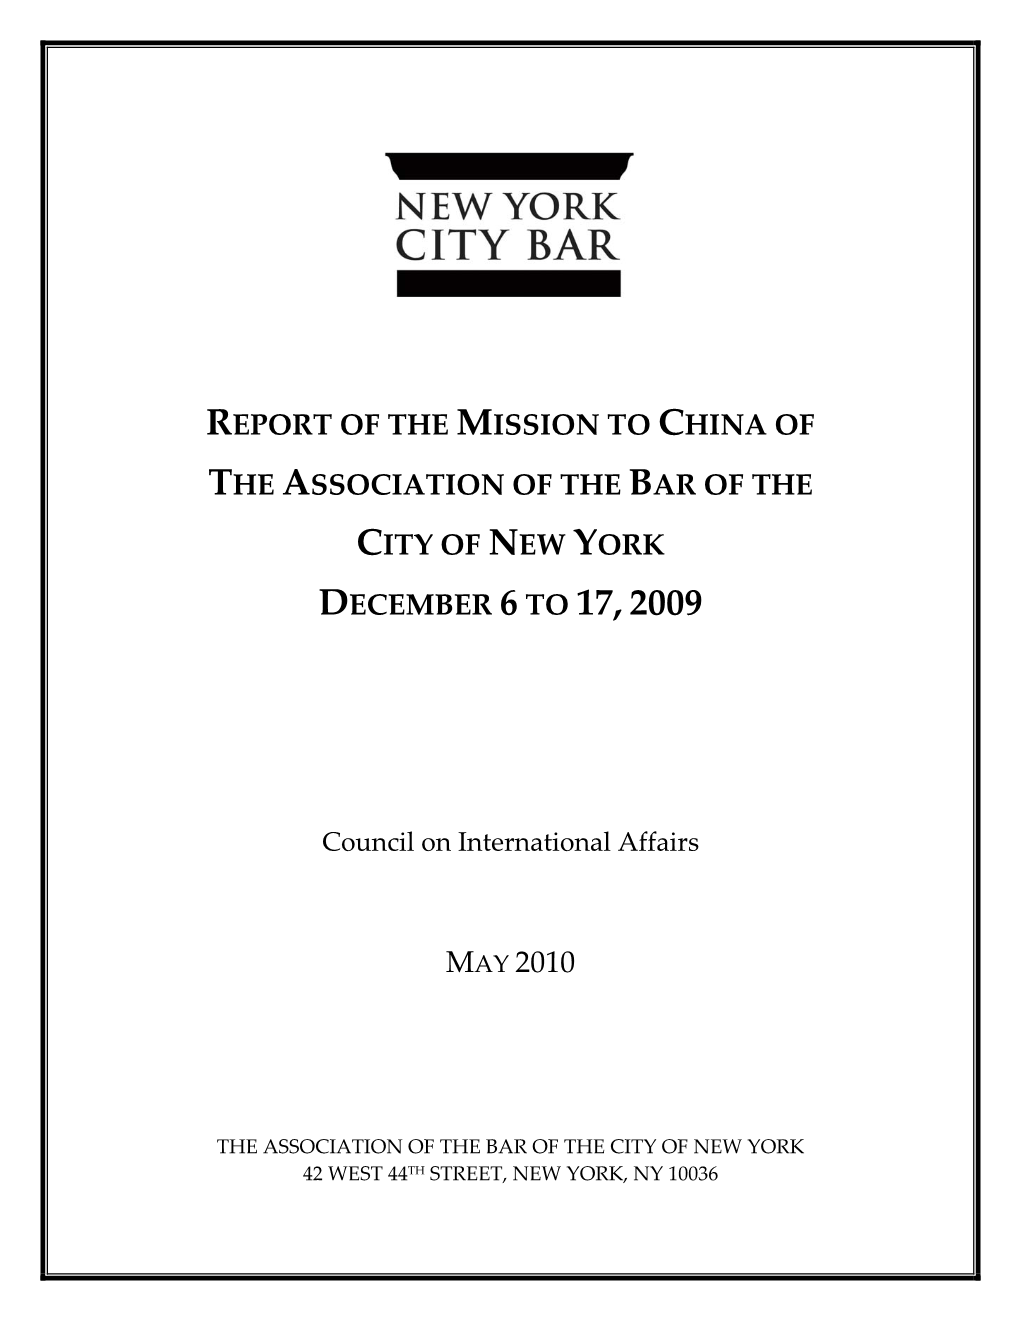 Report of the Mission to China of the Association of the Bar of the City of New York December 6 to 17, 2009